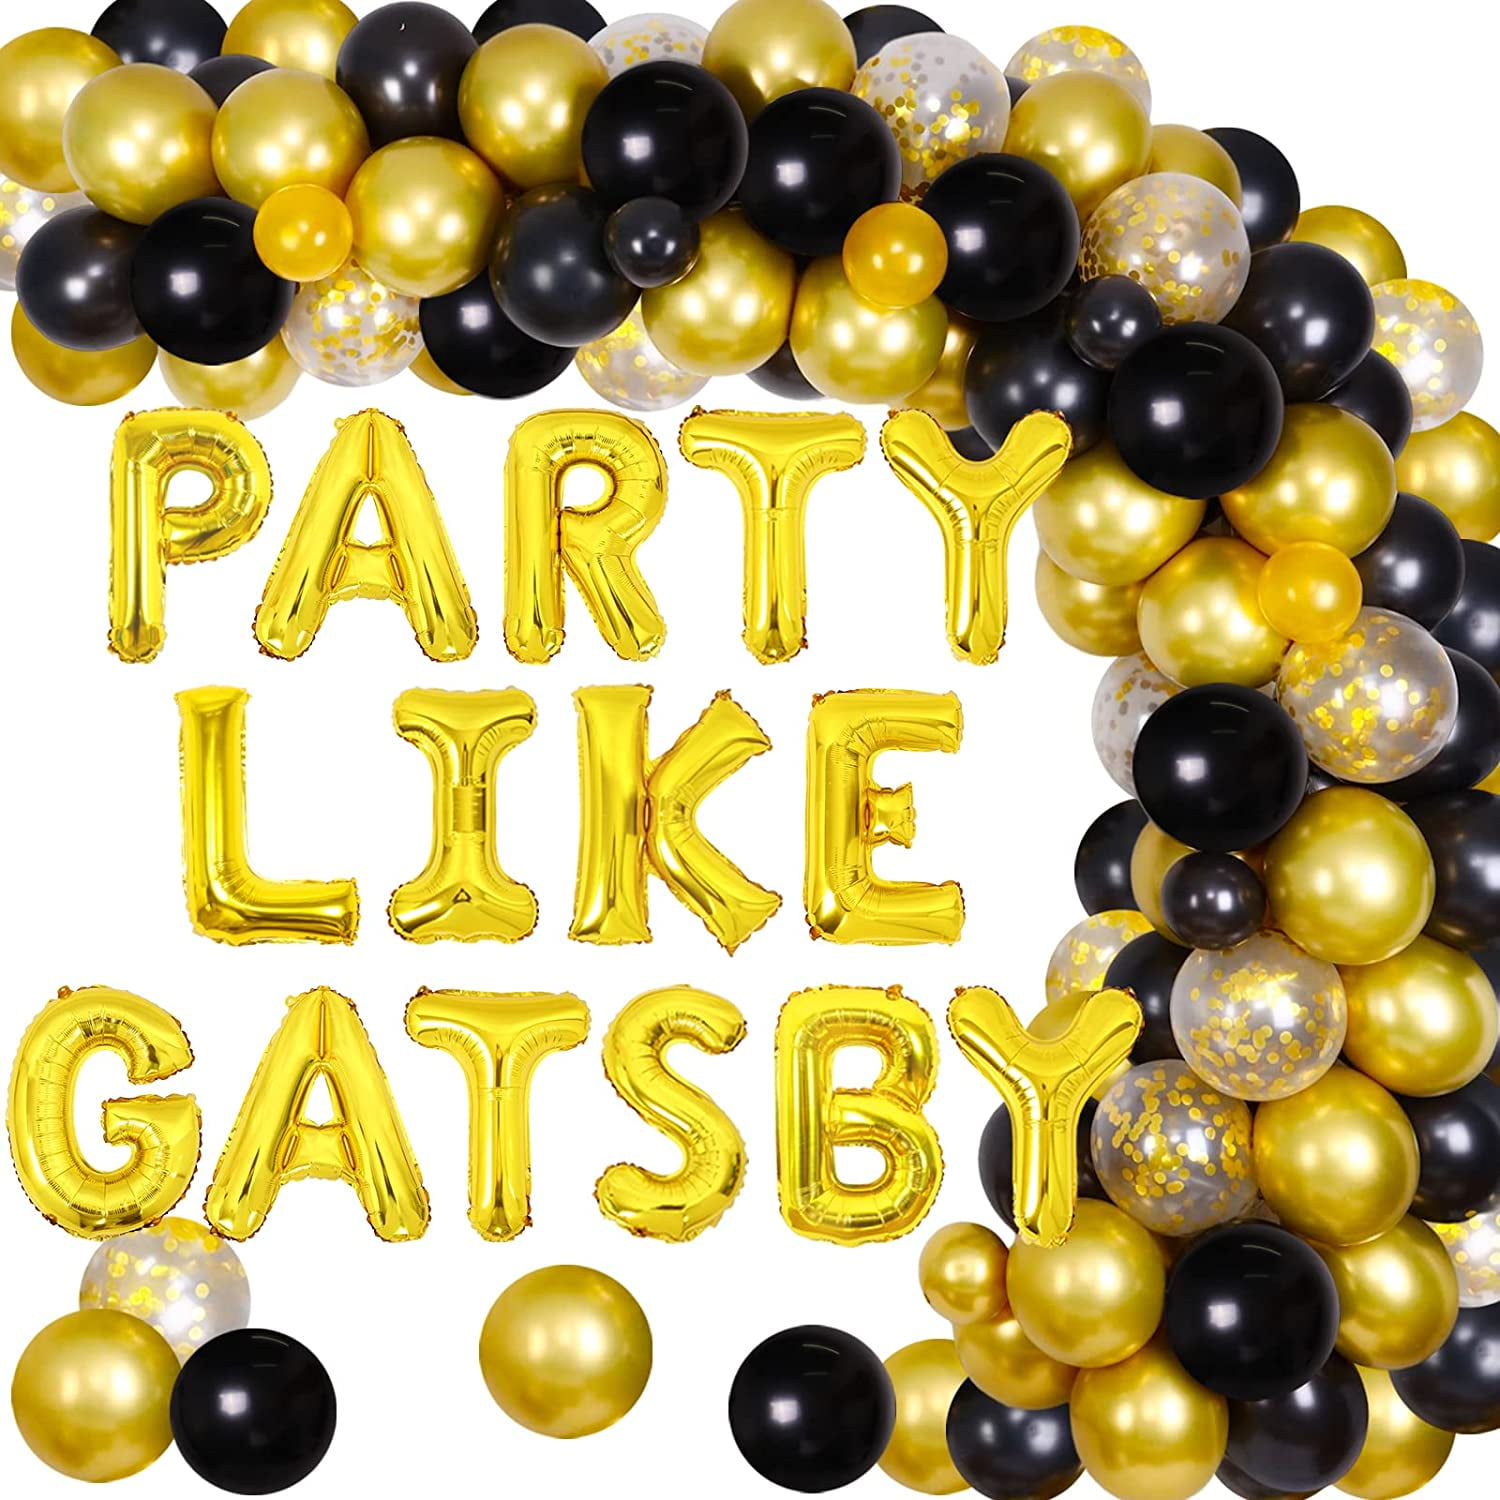 Reusable Led Balloons for Great Gatsby Theme Party Decorations